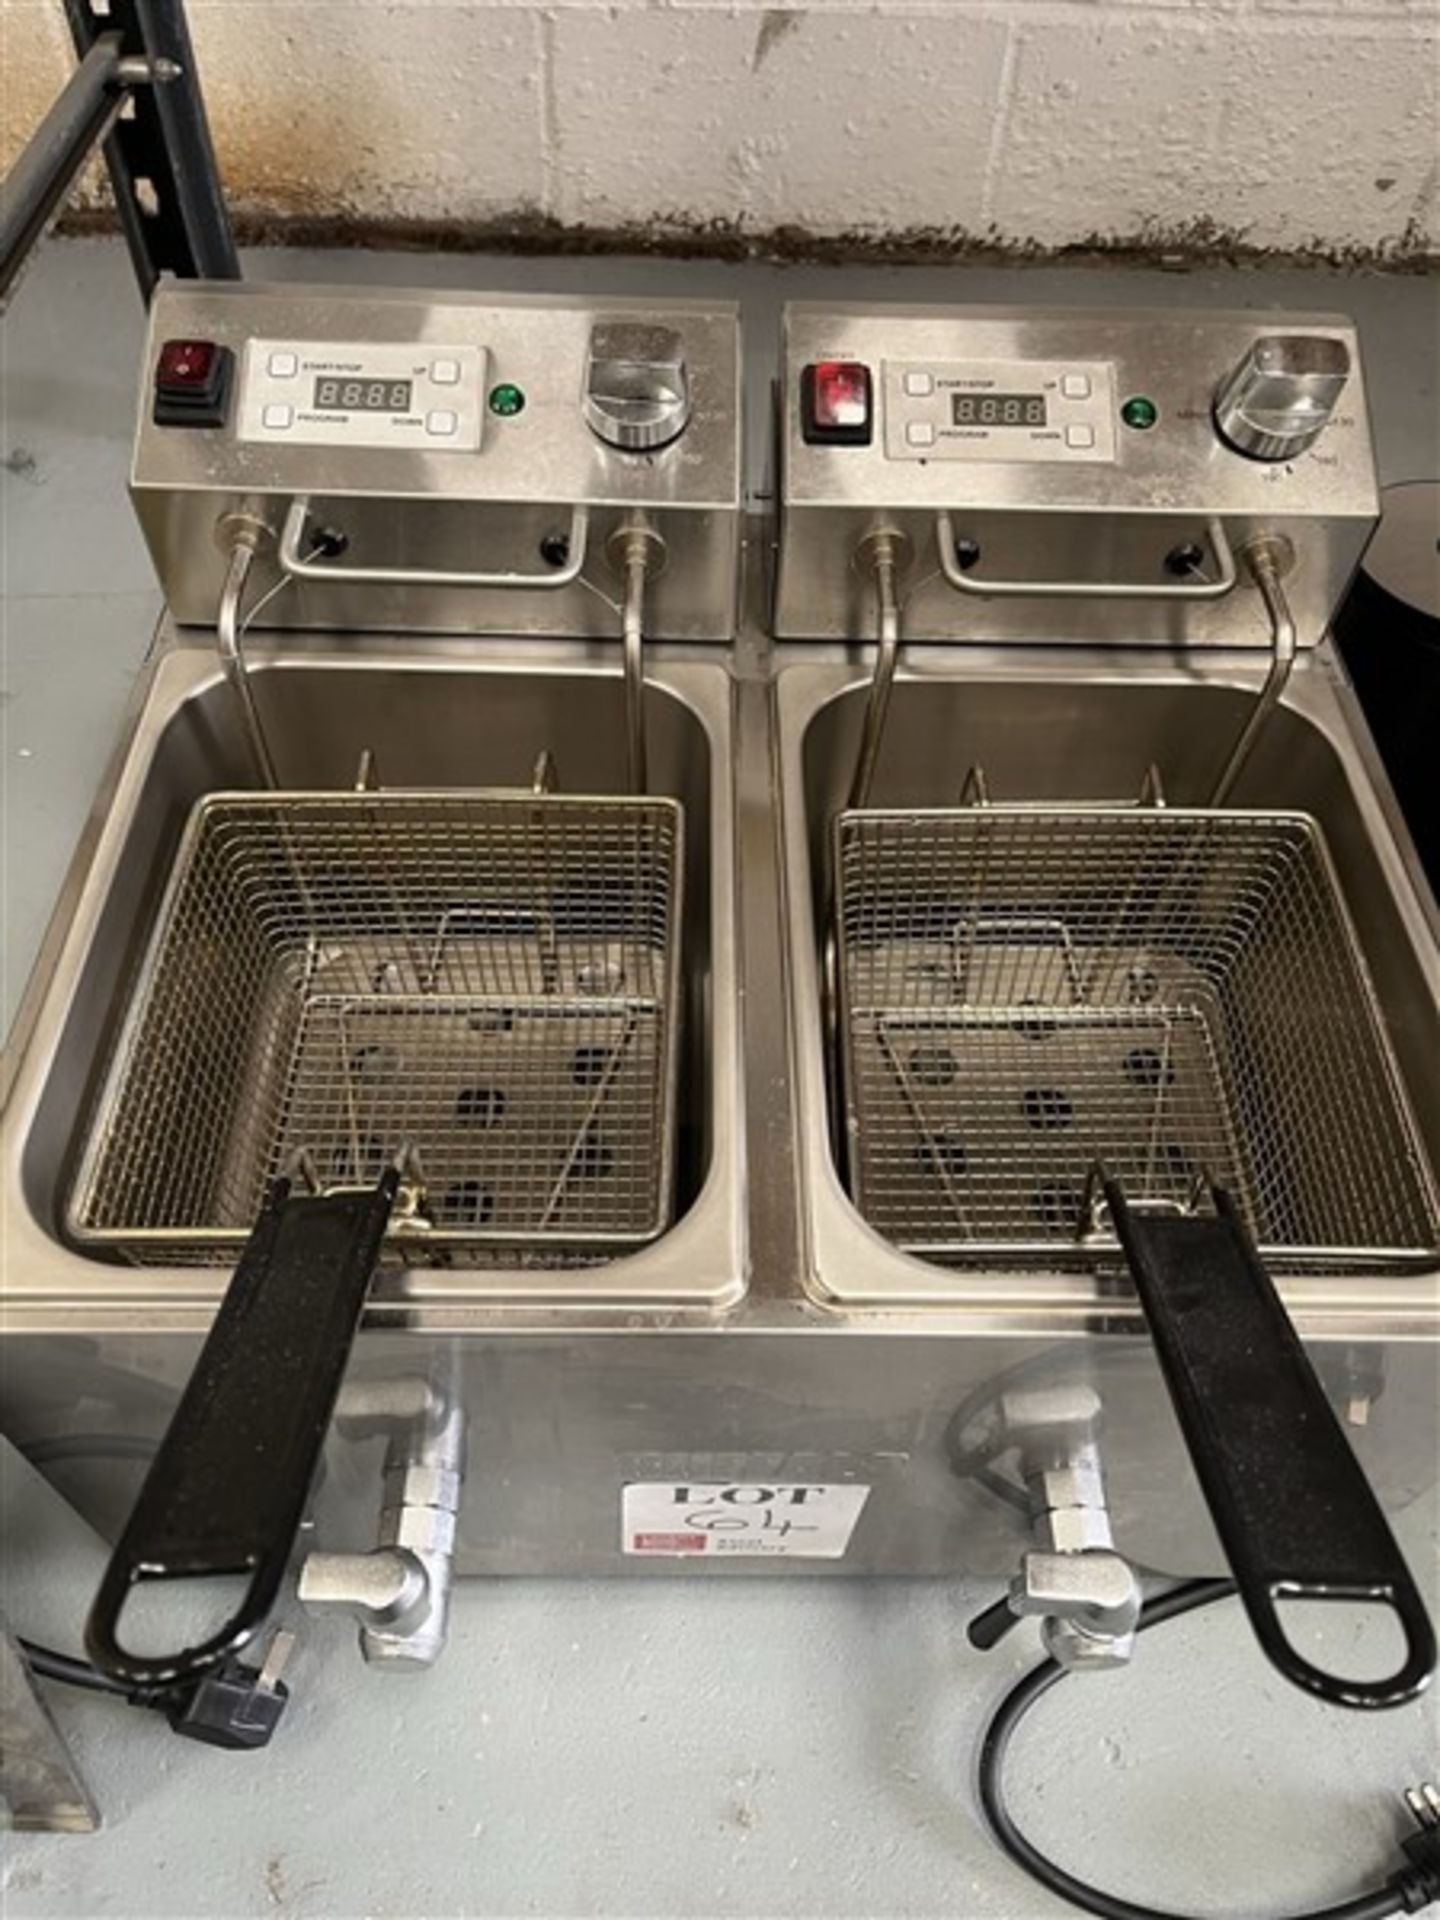 Buffalo stainless steel bench top twin fryer, model FC375, serial no. 202112022716 - Image 2 of 4